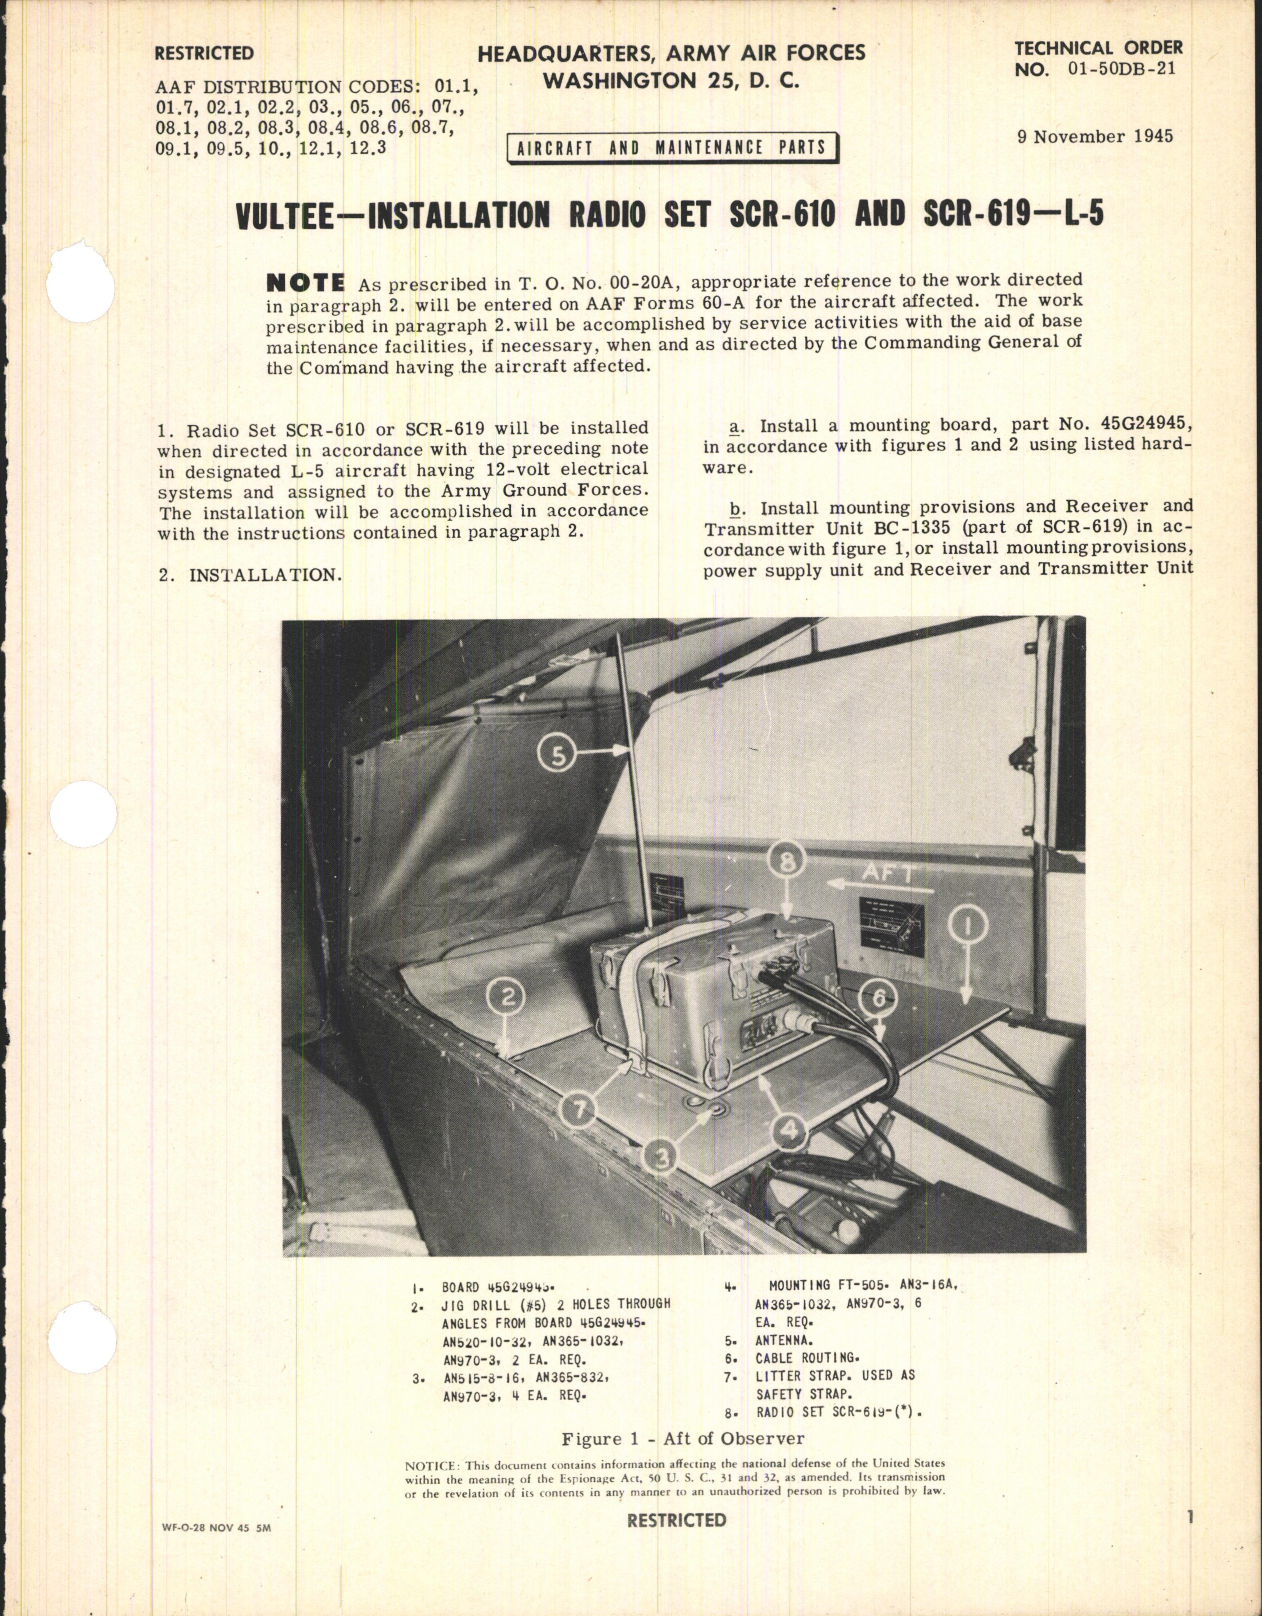 Sample page 1 from AirCorps Library document: Installation Radio Set SCR-610 and SCR-619 for L-5